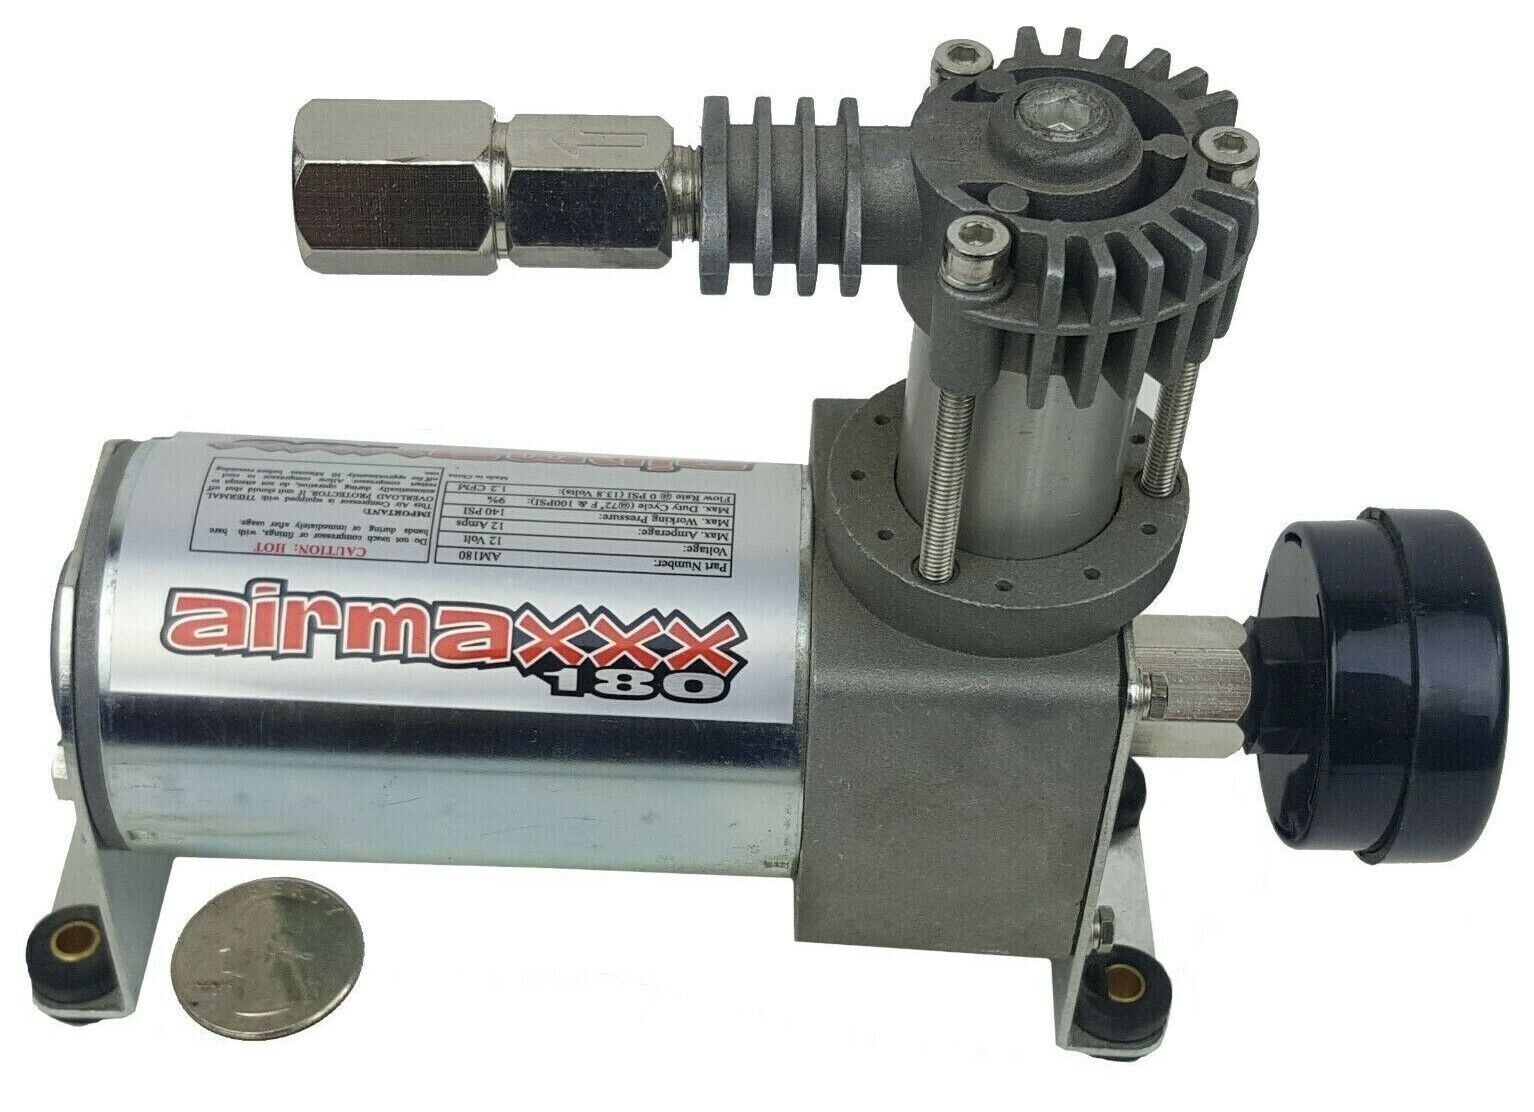 airmaxxx 180 Air Compressor with Air Intake Filter & Check Valve Harley